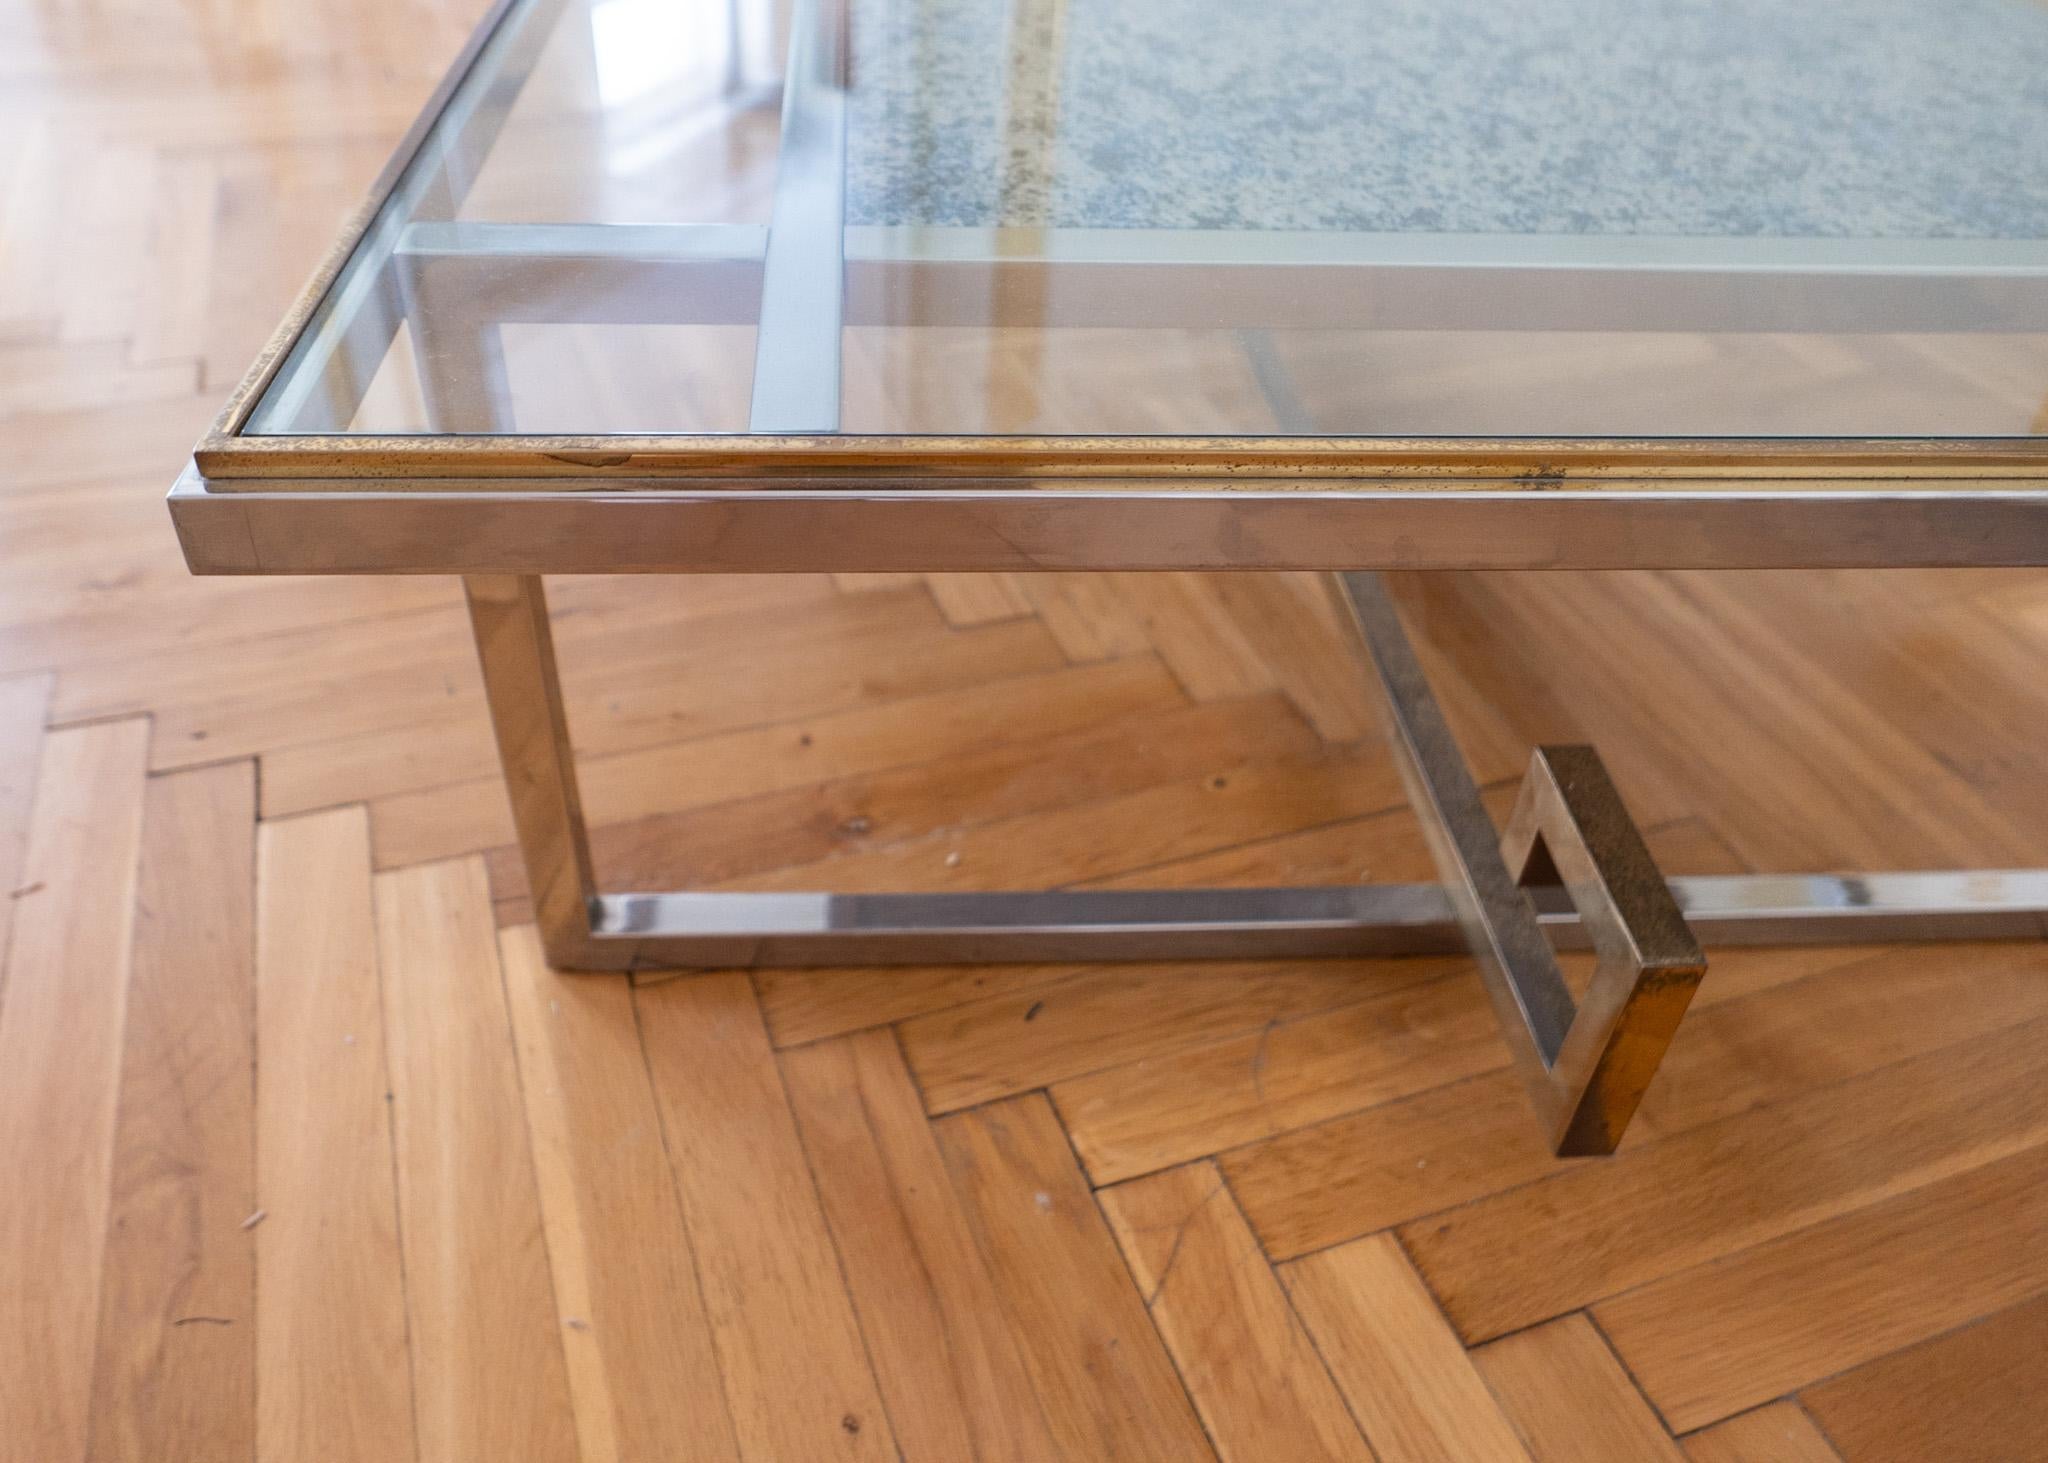 Late 20th Century Mid-Century Modern Brass Chrome Glass Marble Coffee Table, Italy 1970s For Sale